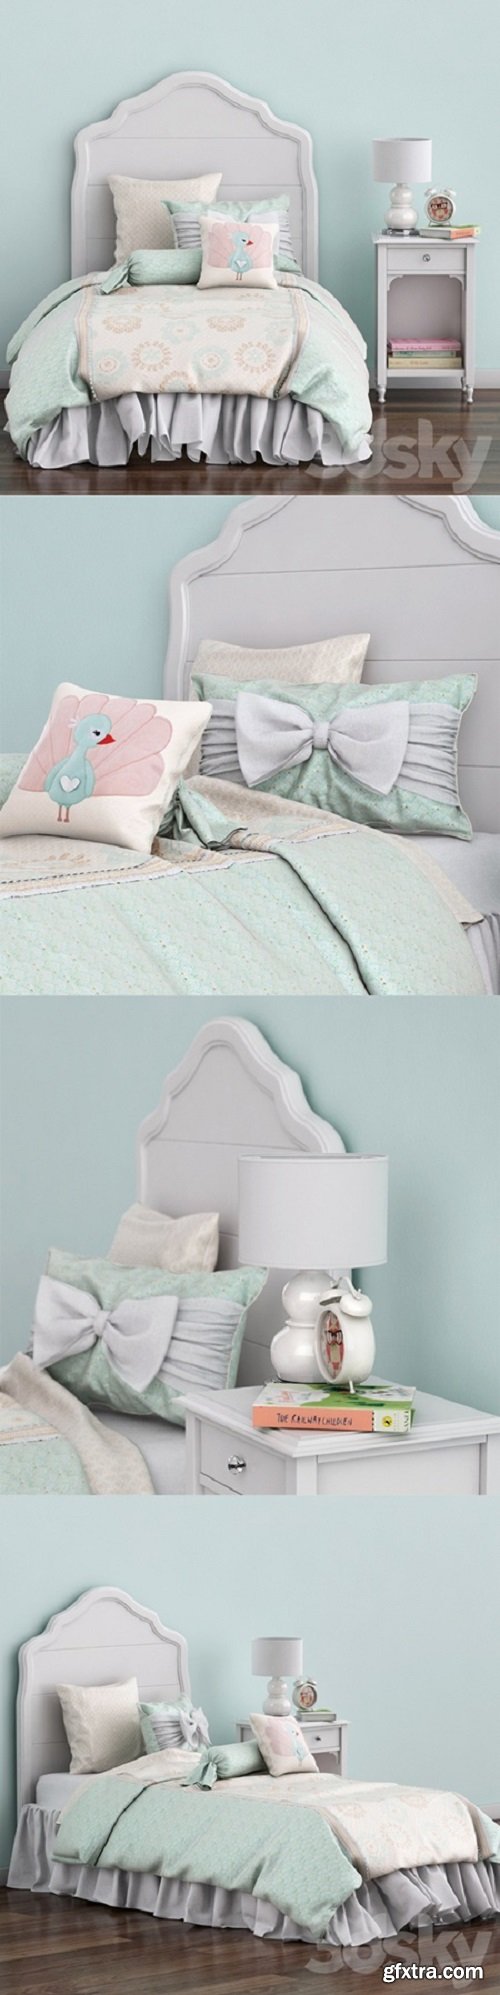 Baby bed and nightstand Juliette Pottery barn kids